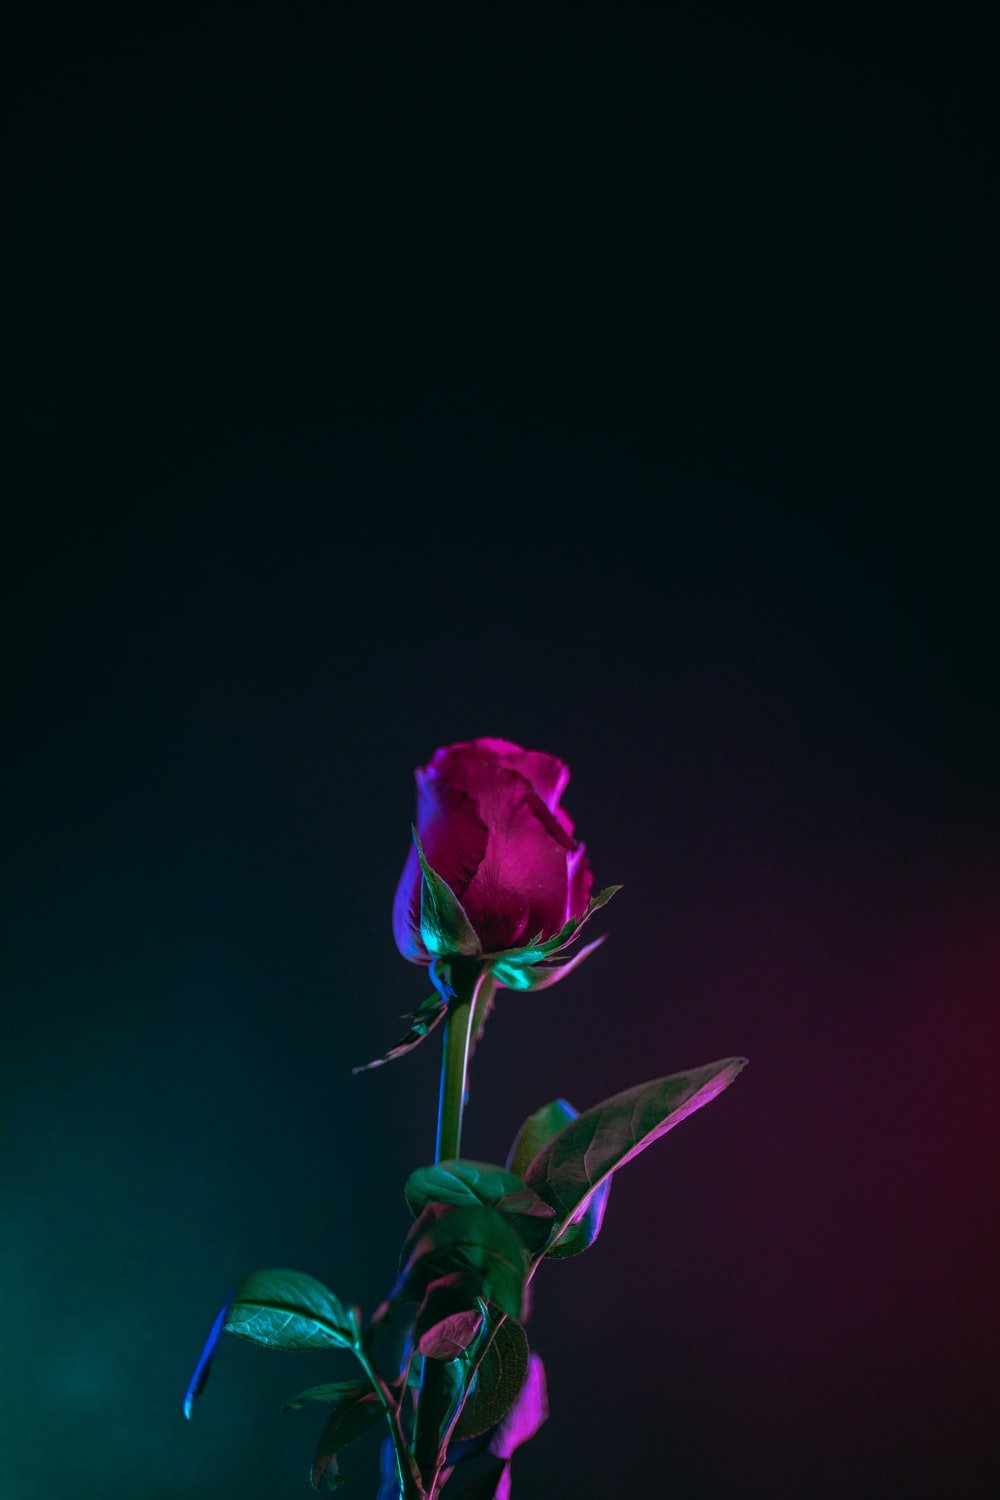 Love Rose Picture. Download Free Image